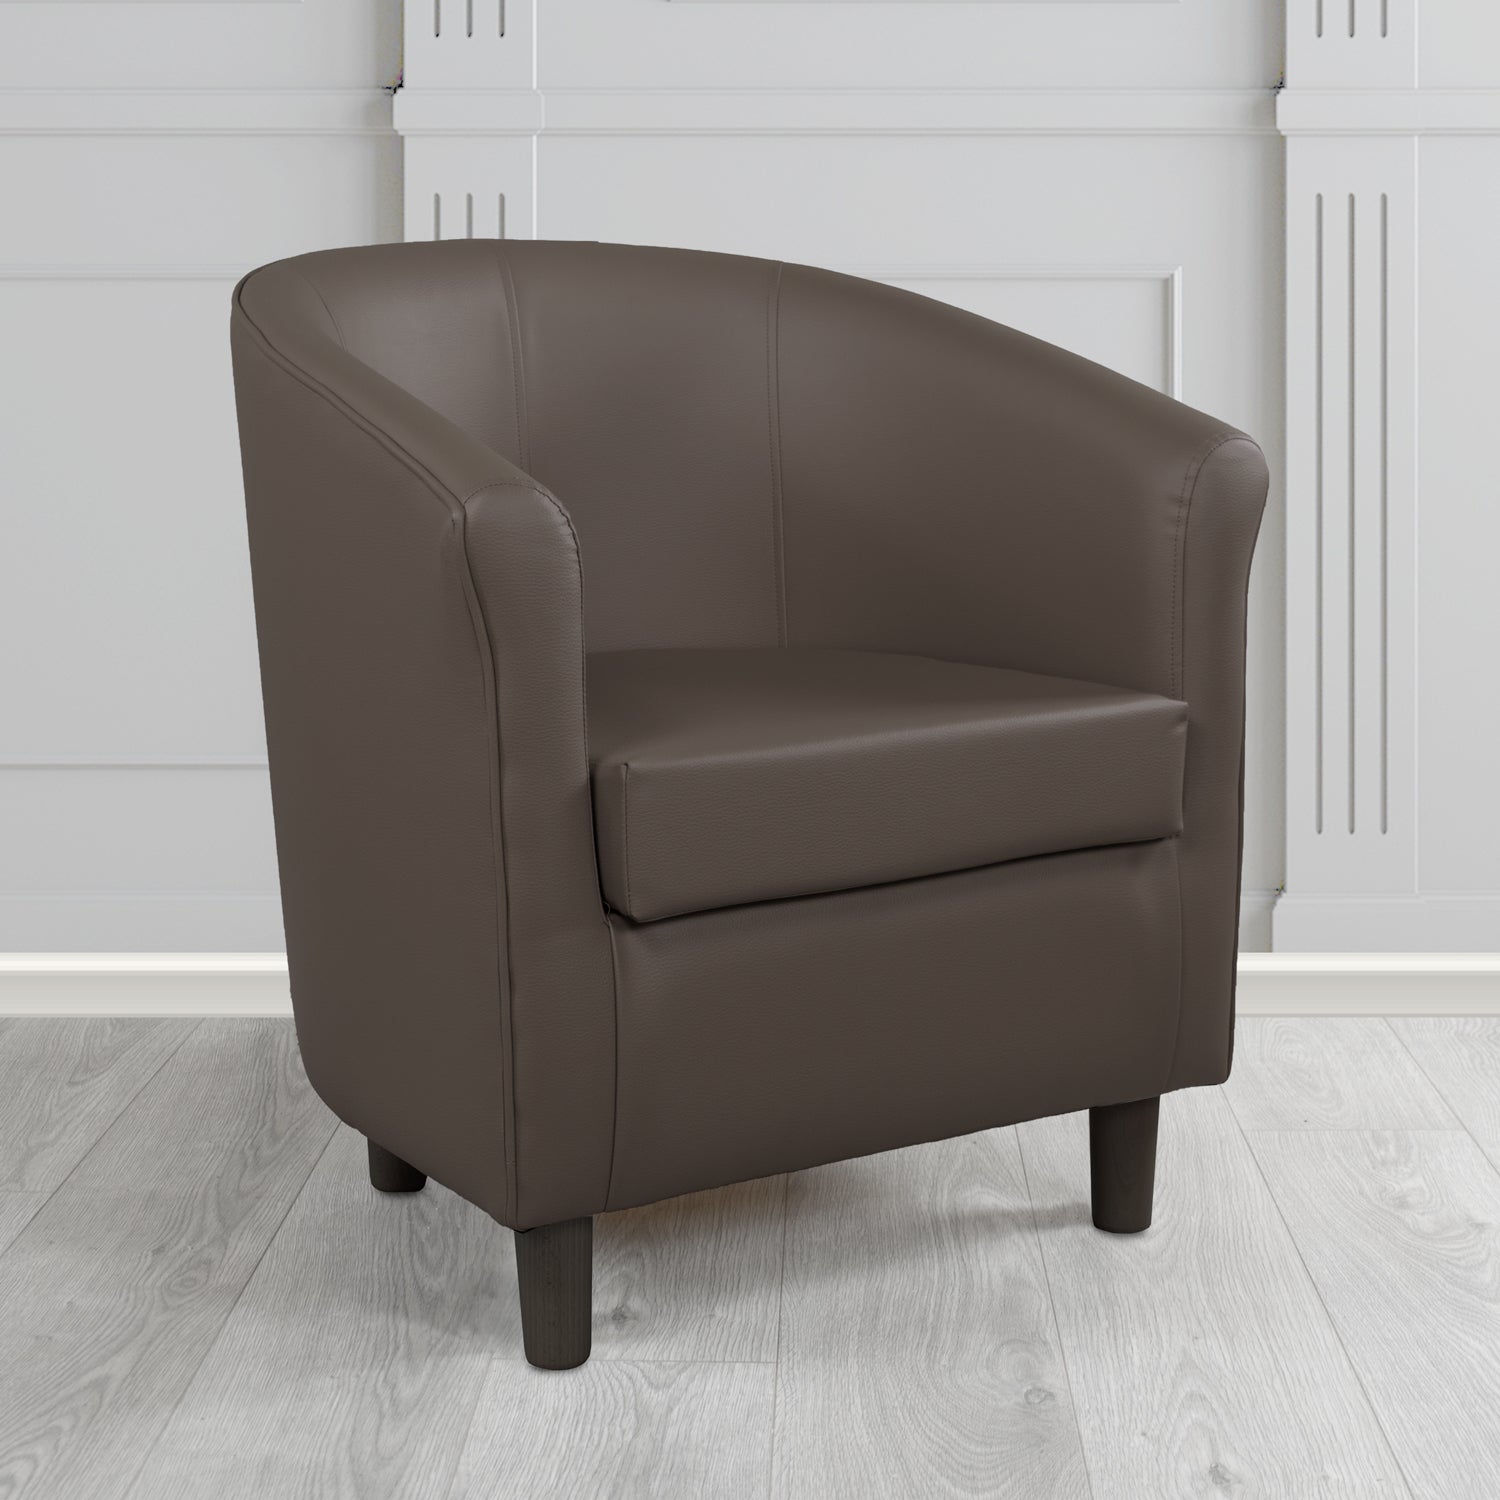 Tuscany Tub Chair in Madrid Chocolate Faux Leather - The Tub Chair Shop